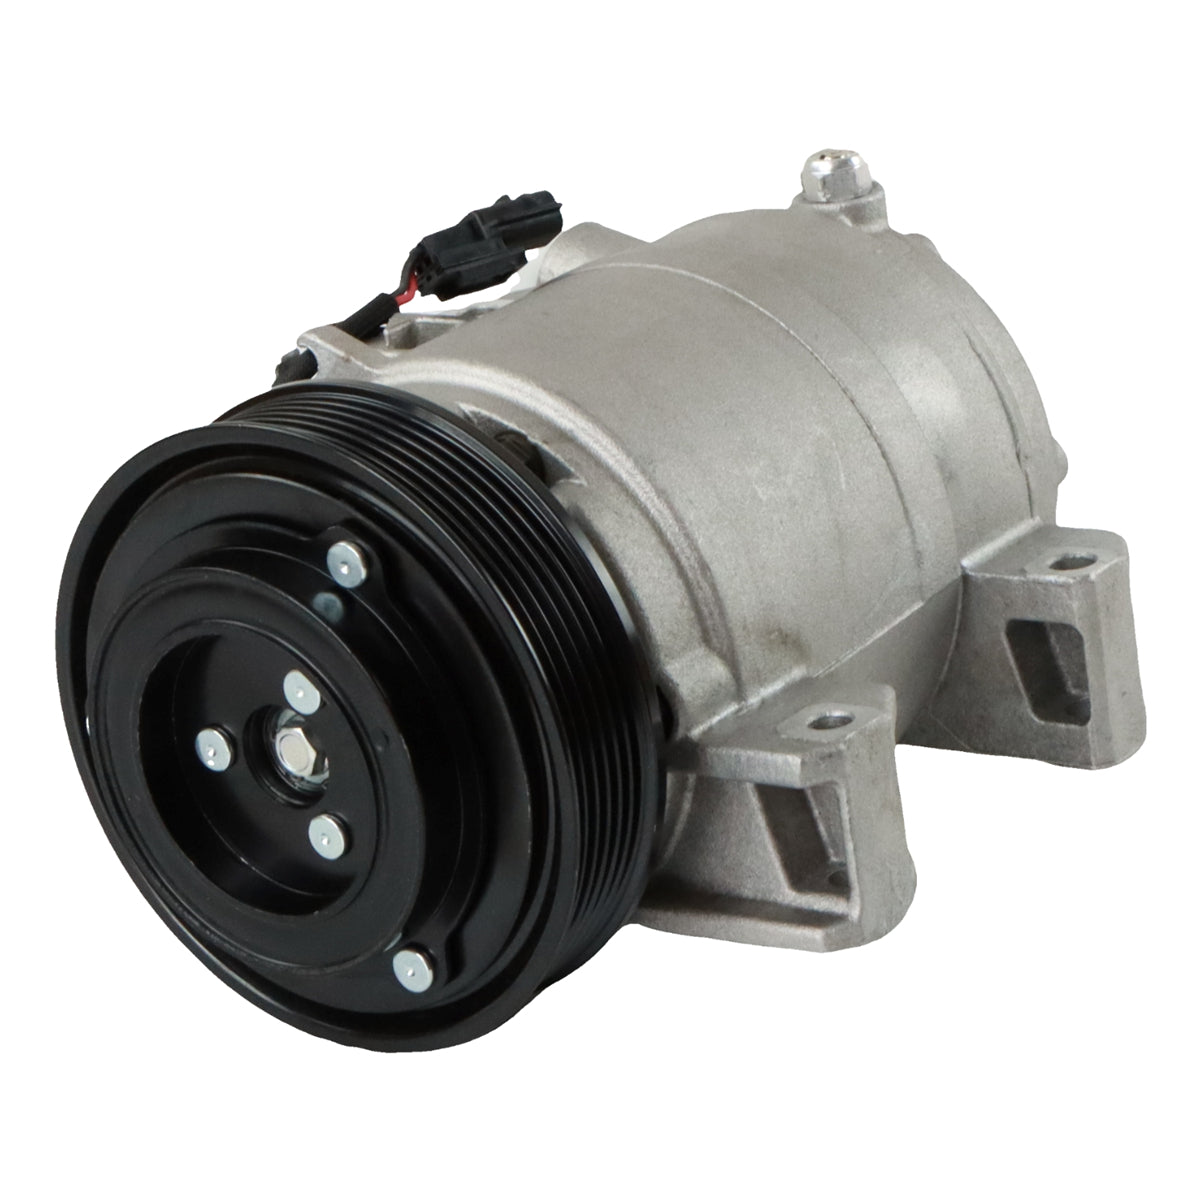 Daysyore® AC Compressor for 2008-2013 Nissan Rogue 2.5L CO 11200C 10347900 10362251